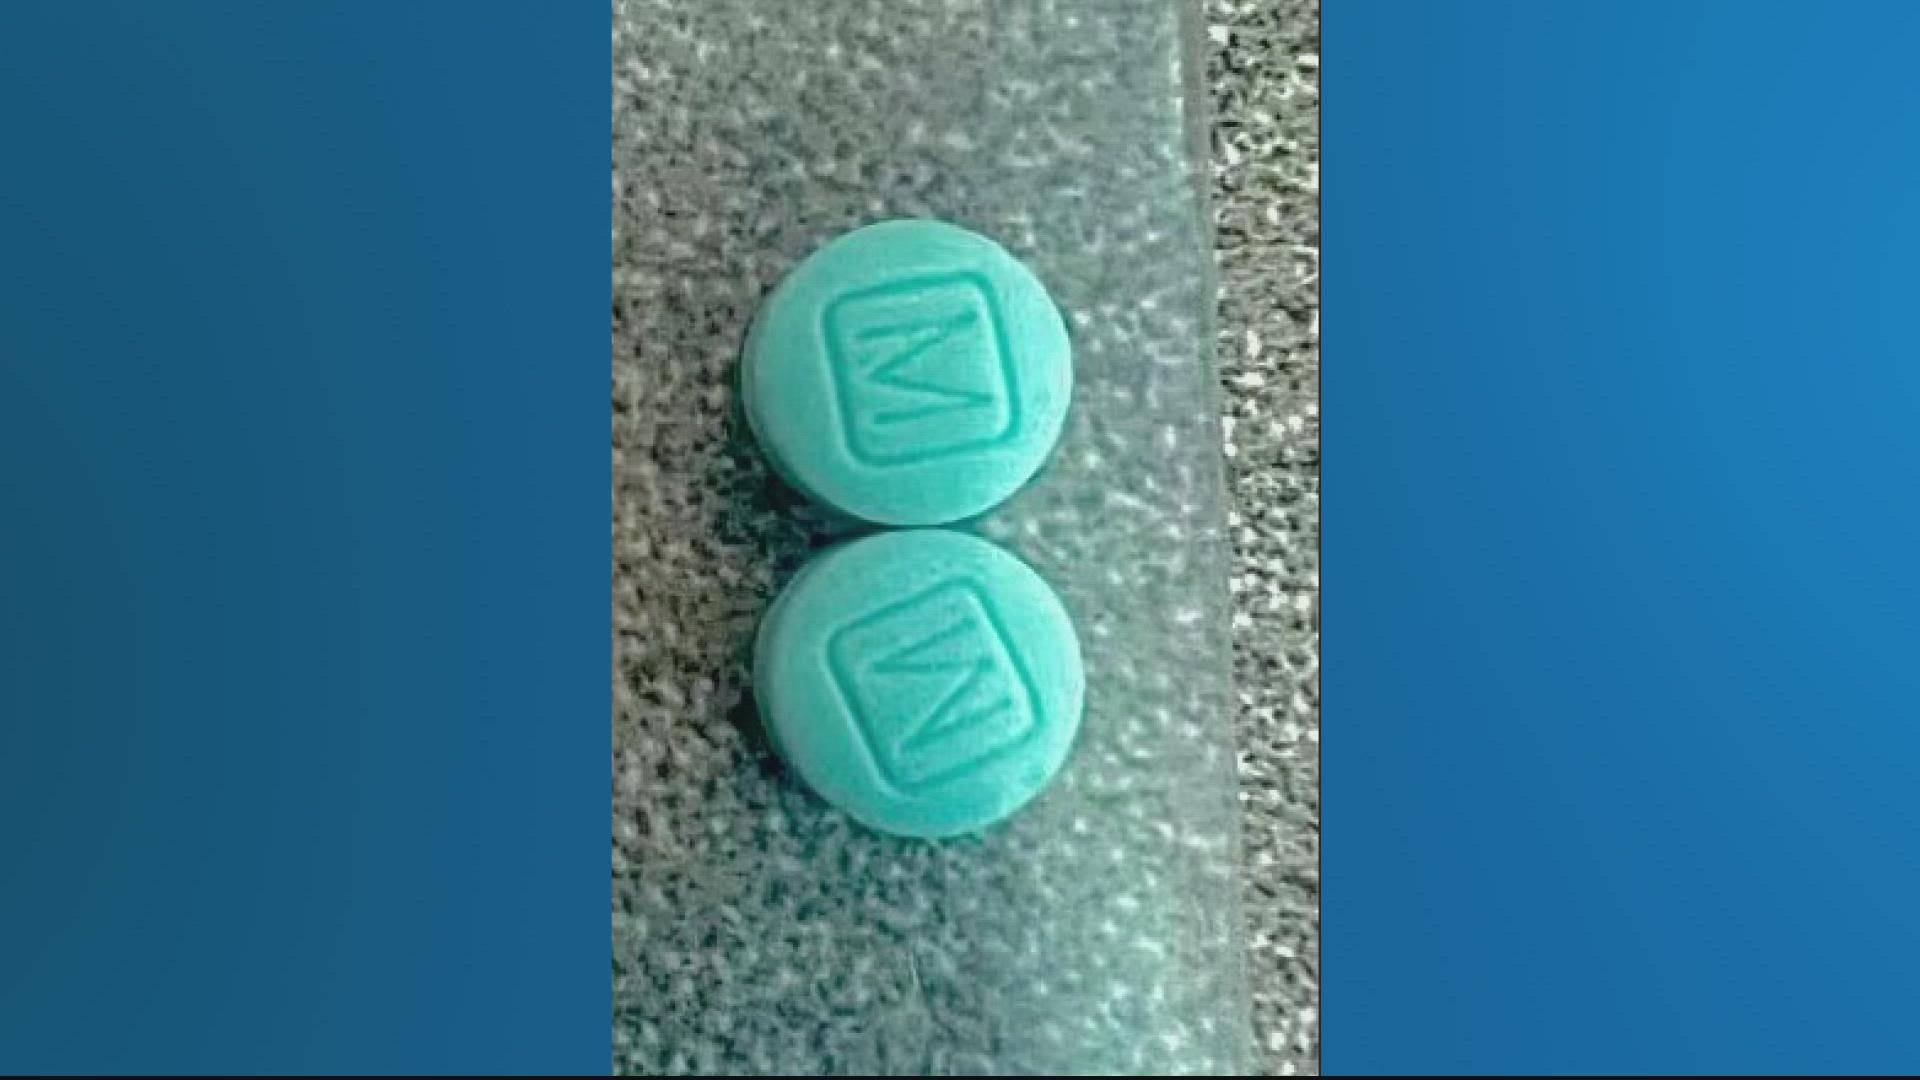 The Prince PGPD is warning residents of fentanyl-laced pills that have been found circulating the area recently and has been linked to overdoses.